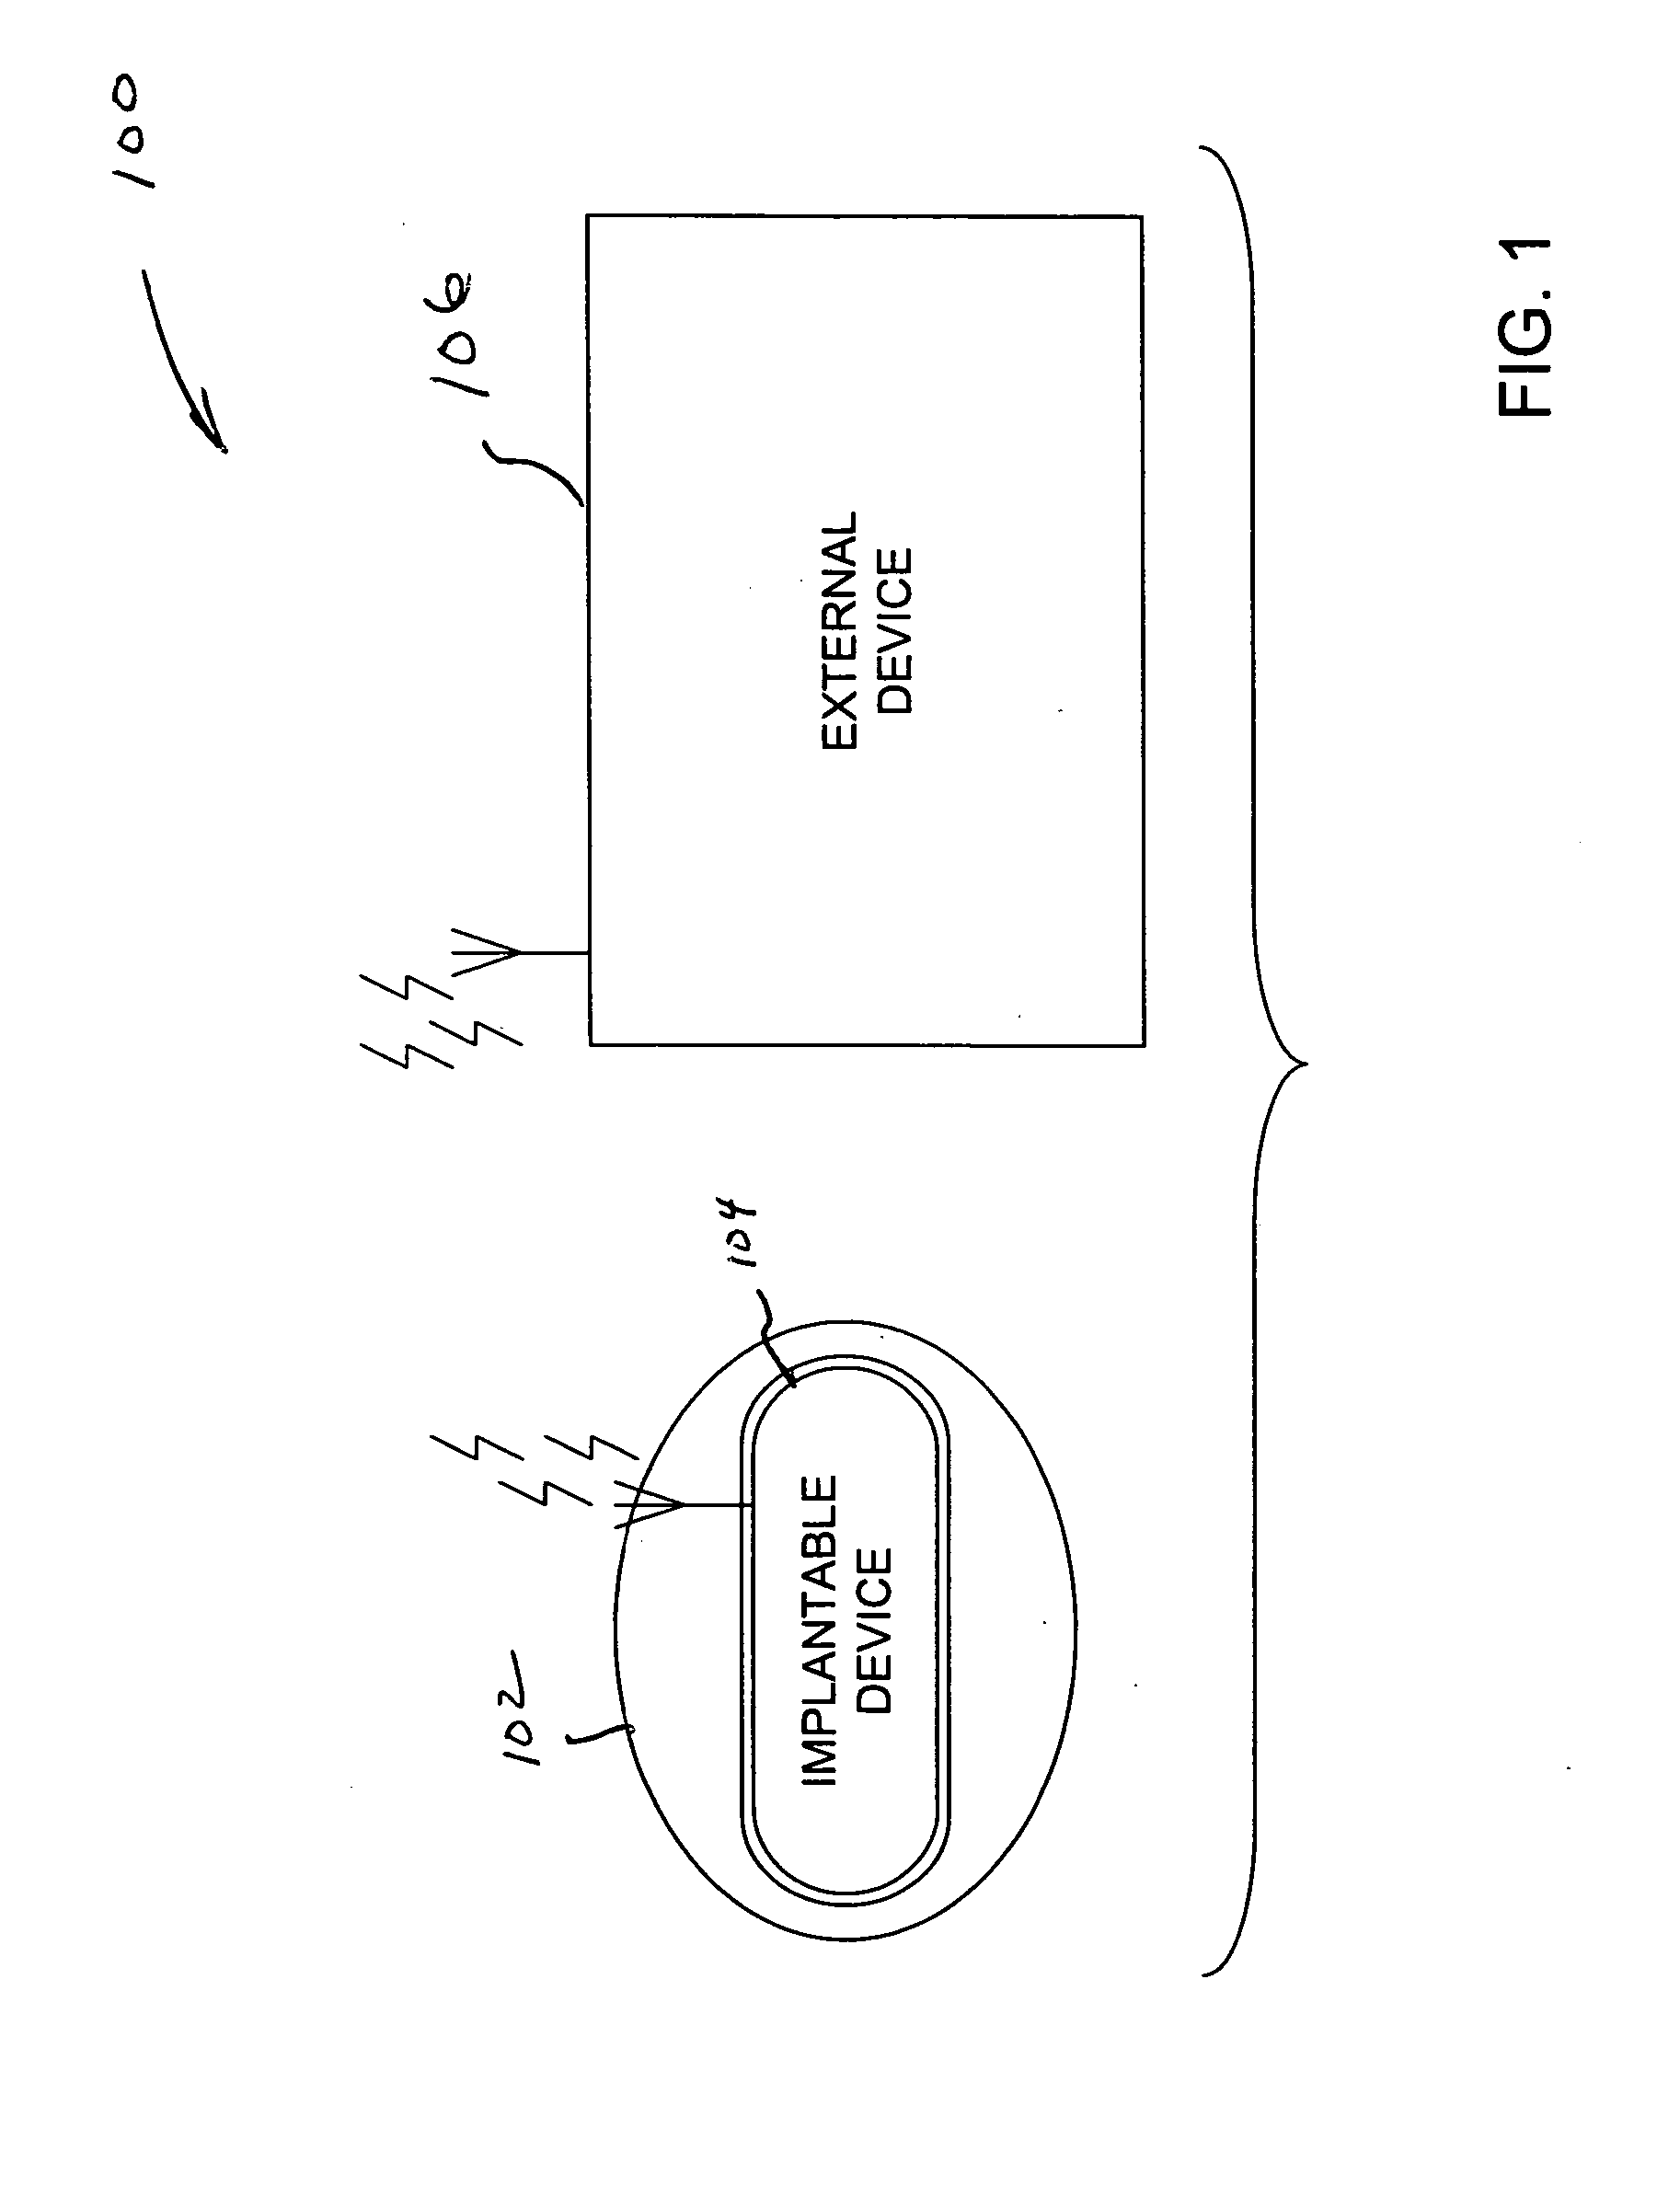 Implantable telemetric monitoring system, apparatus, and method